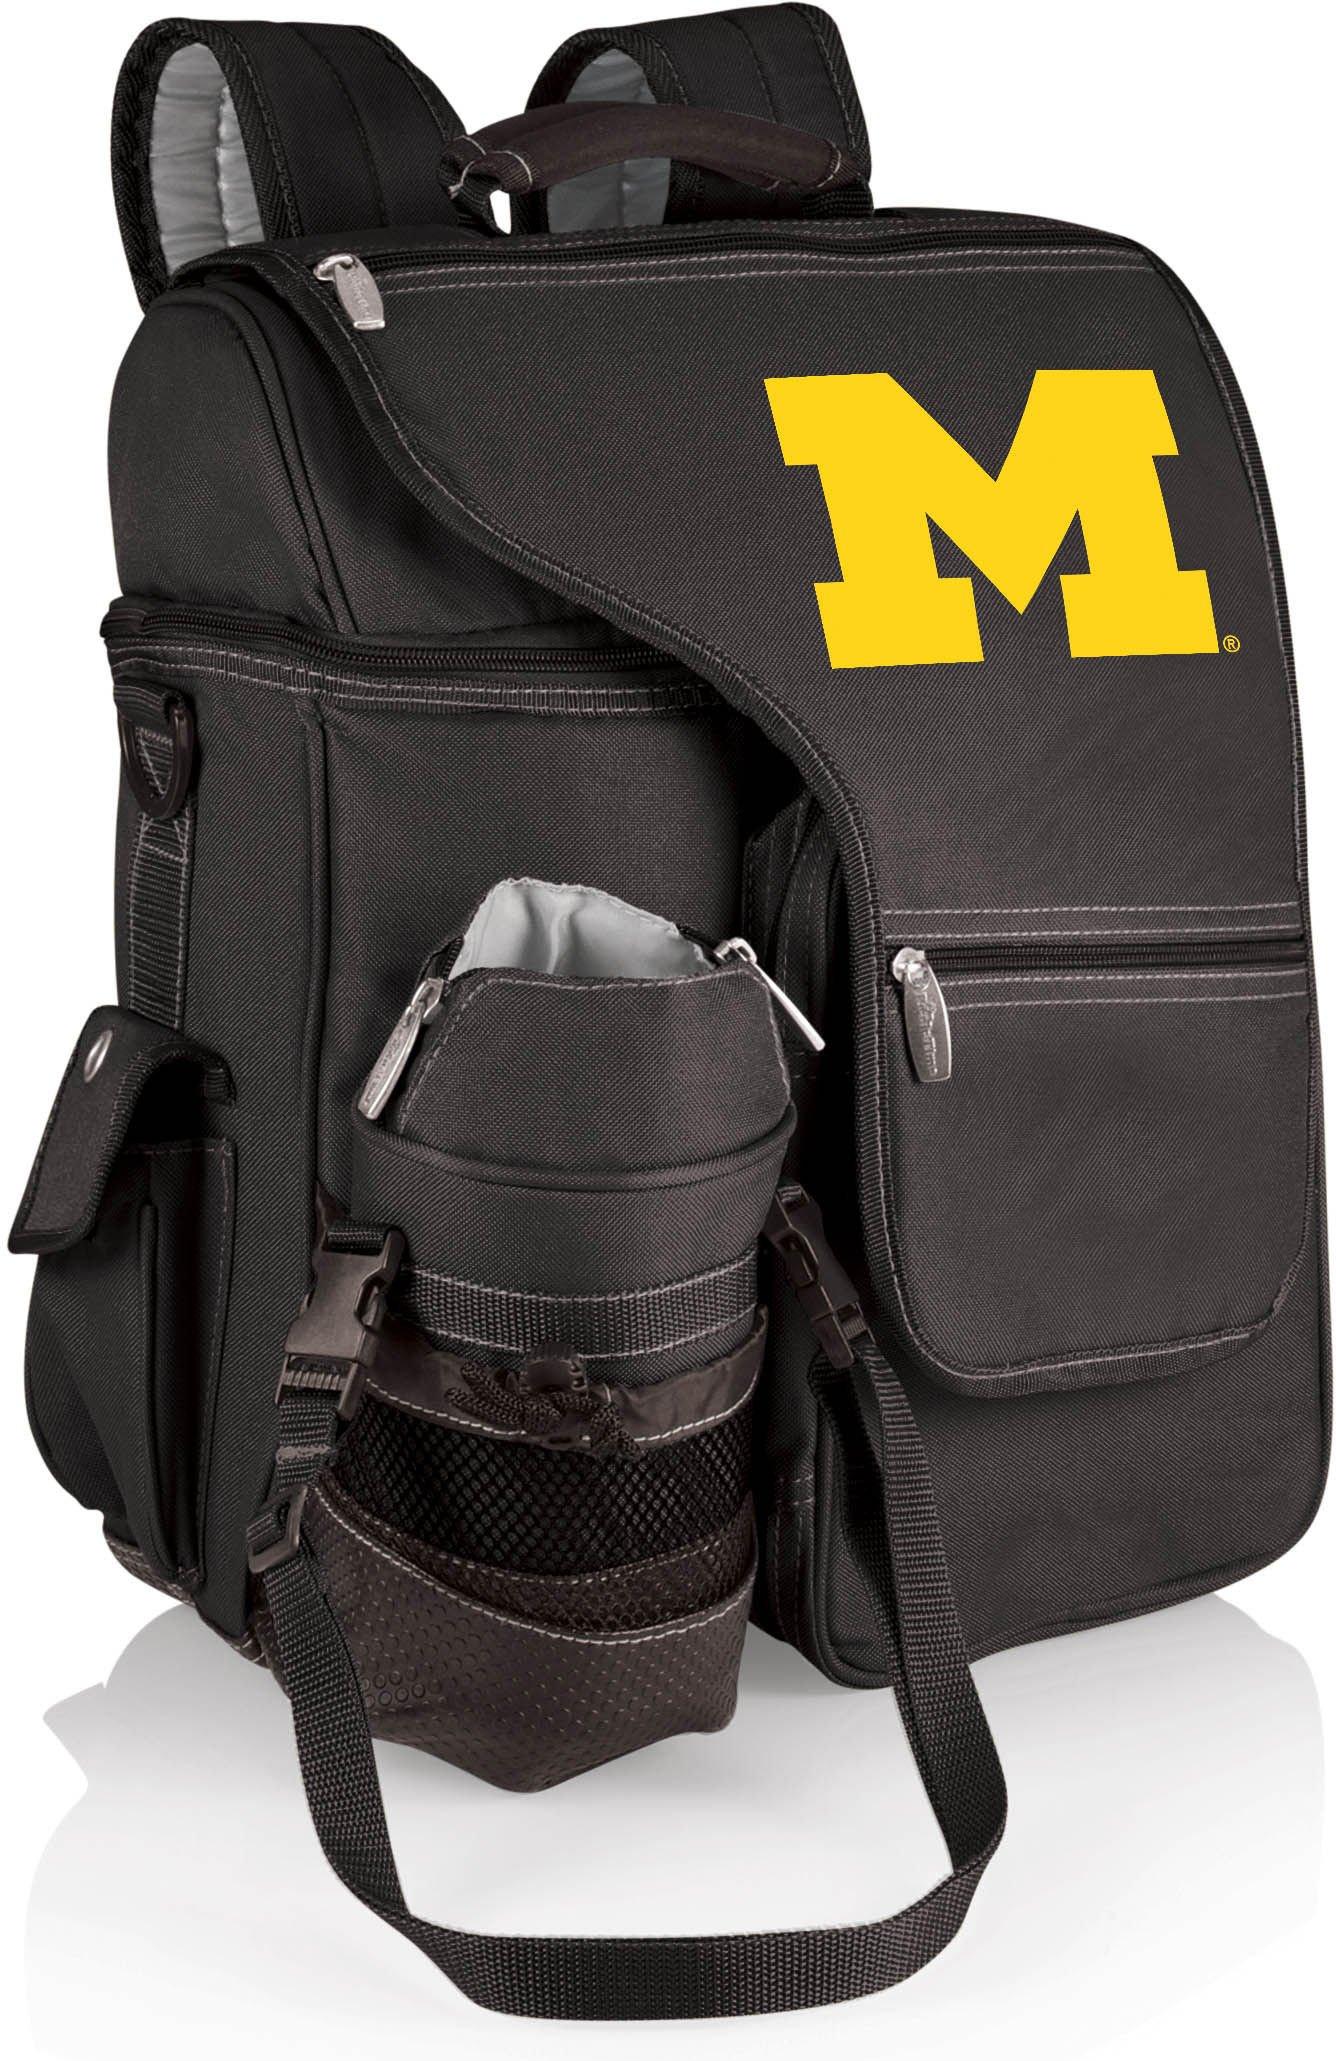 Michigan Wolverine Turismo Backpack by Picnic Time